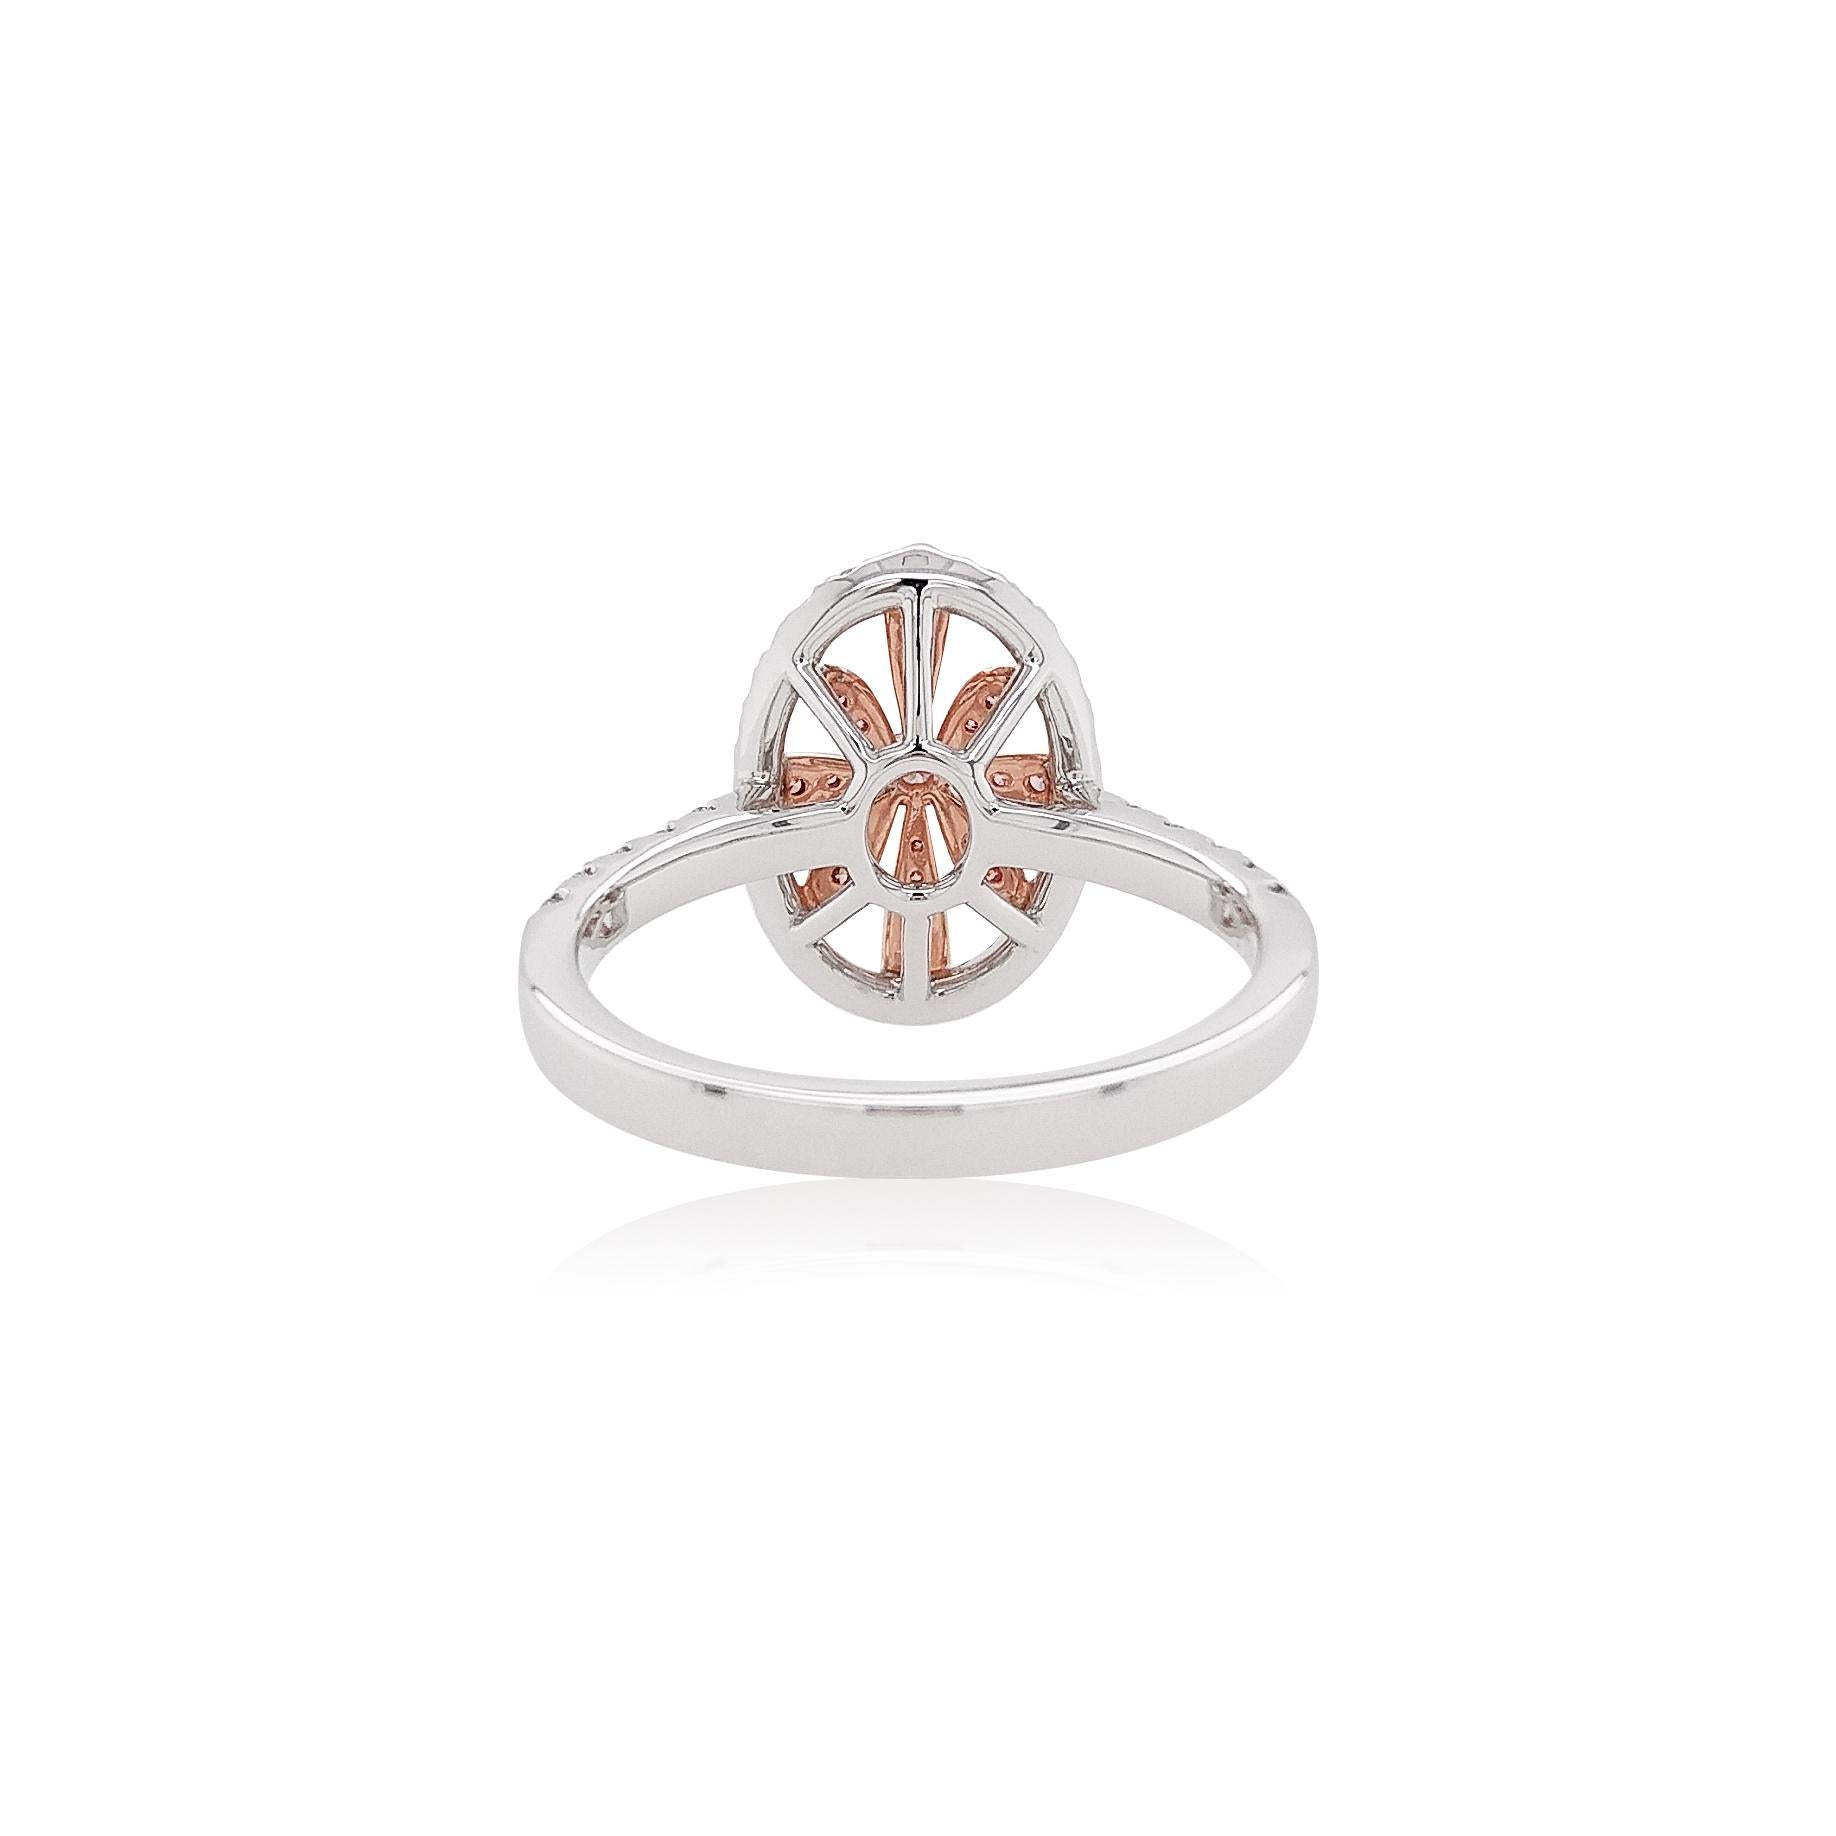 This elegant platinum ring features spectacular natural Argyle pink diamonds in a sparkle motif, surrounded by a halo of scintillating white diamond. Dazzling and playful, this spectacular cocktail ring will add a touch of elegance to any outfit.